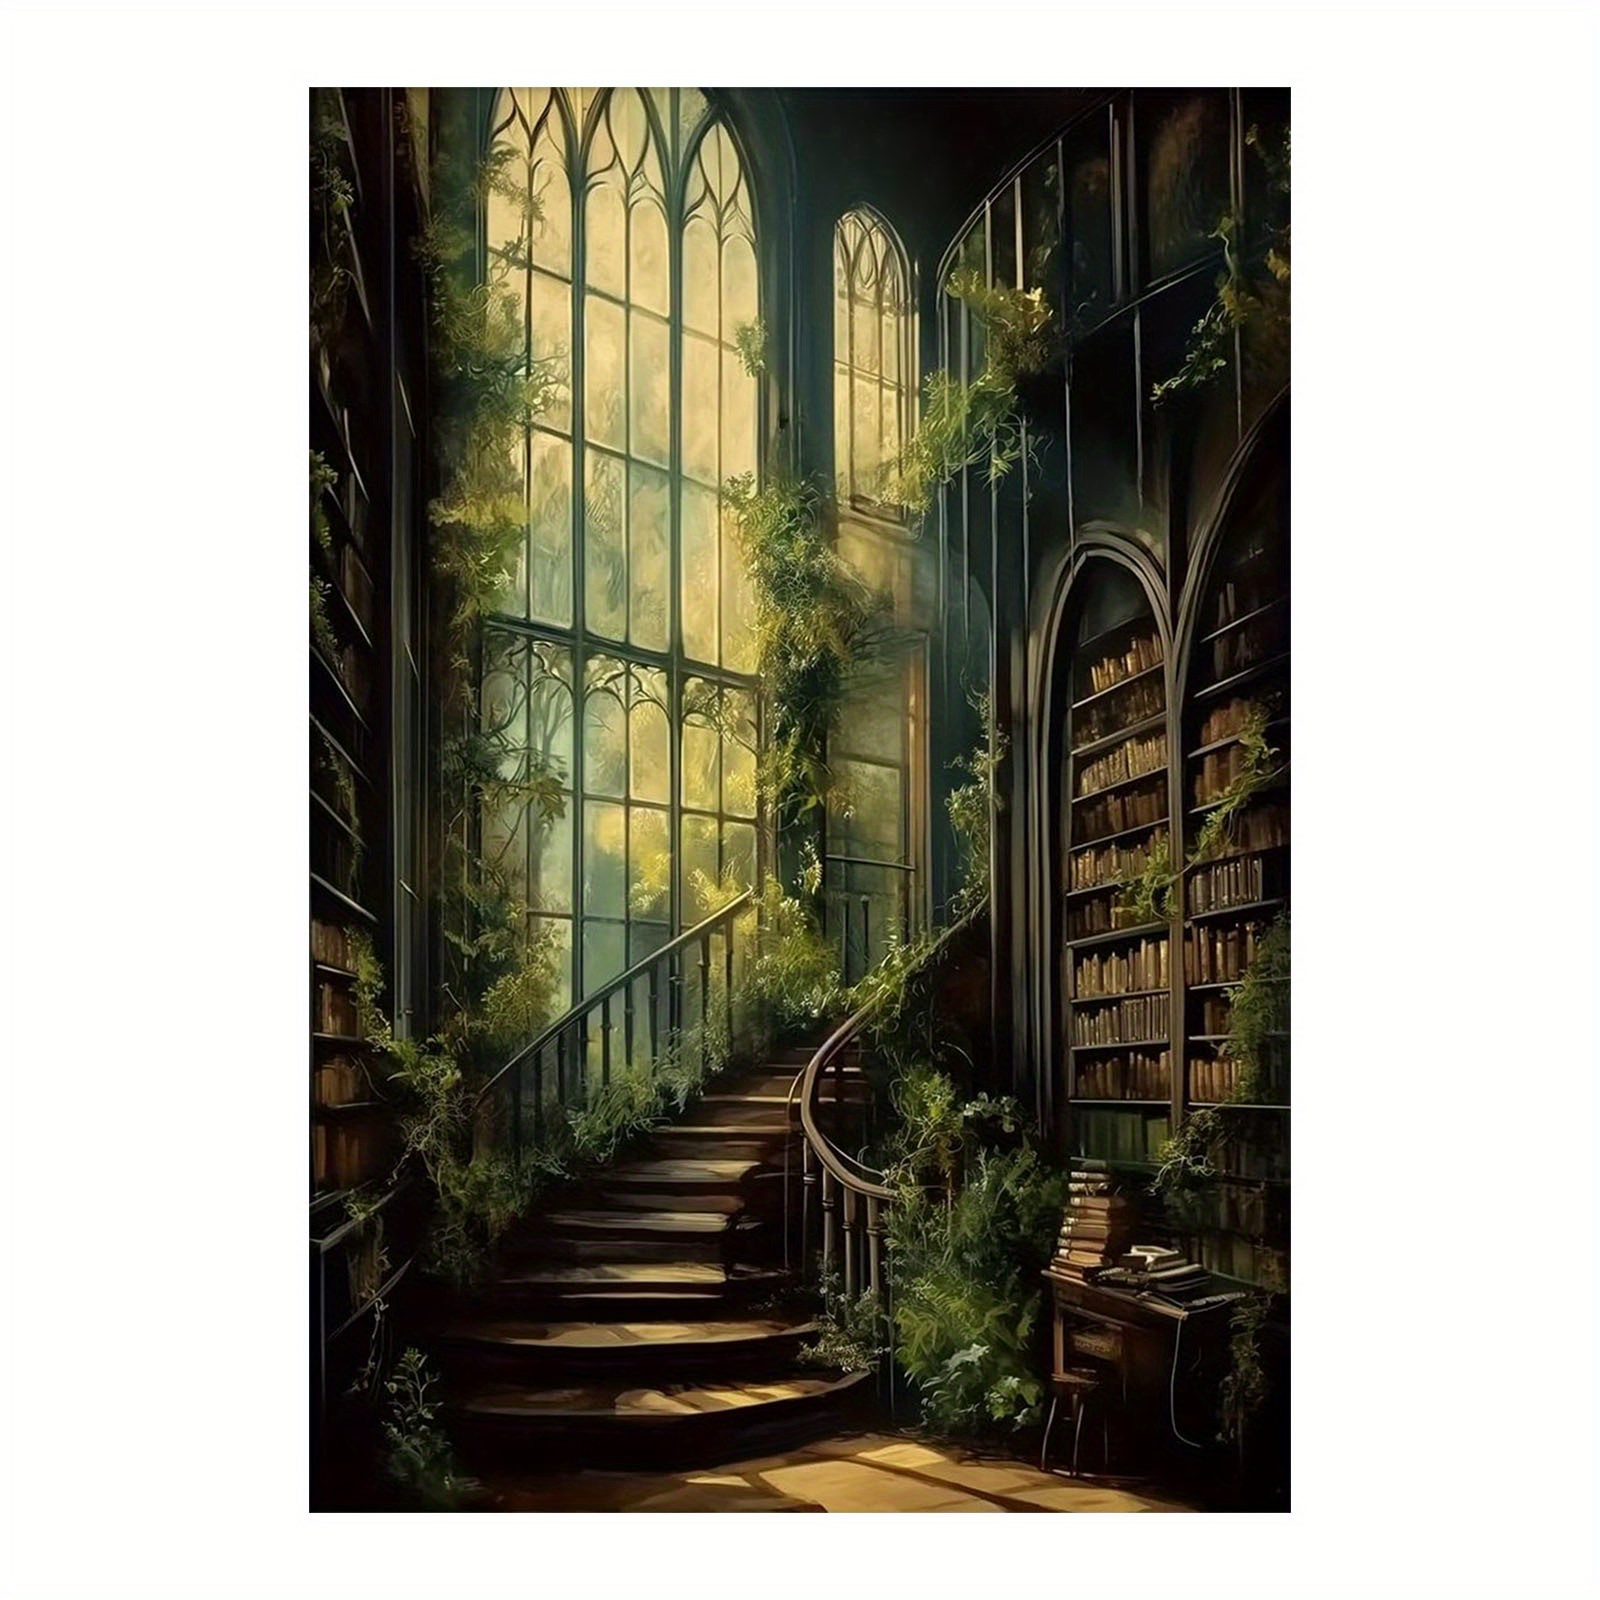 

Dark Academia Gothic Canvas Art - Vintage Victorian & Medieval Castle Library Prints, Frameless 12x18" Wall Decor For Bedroom, Living Room, Office, And Dorm